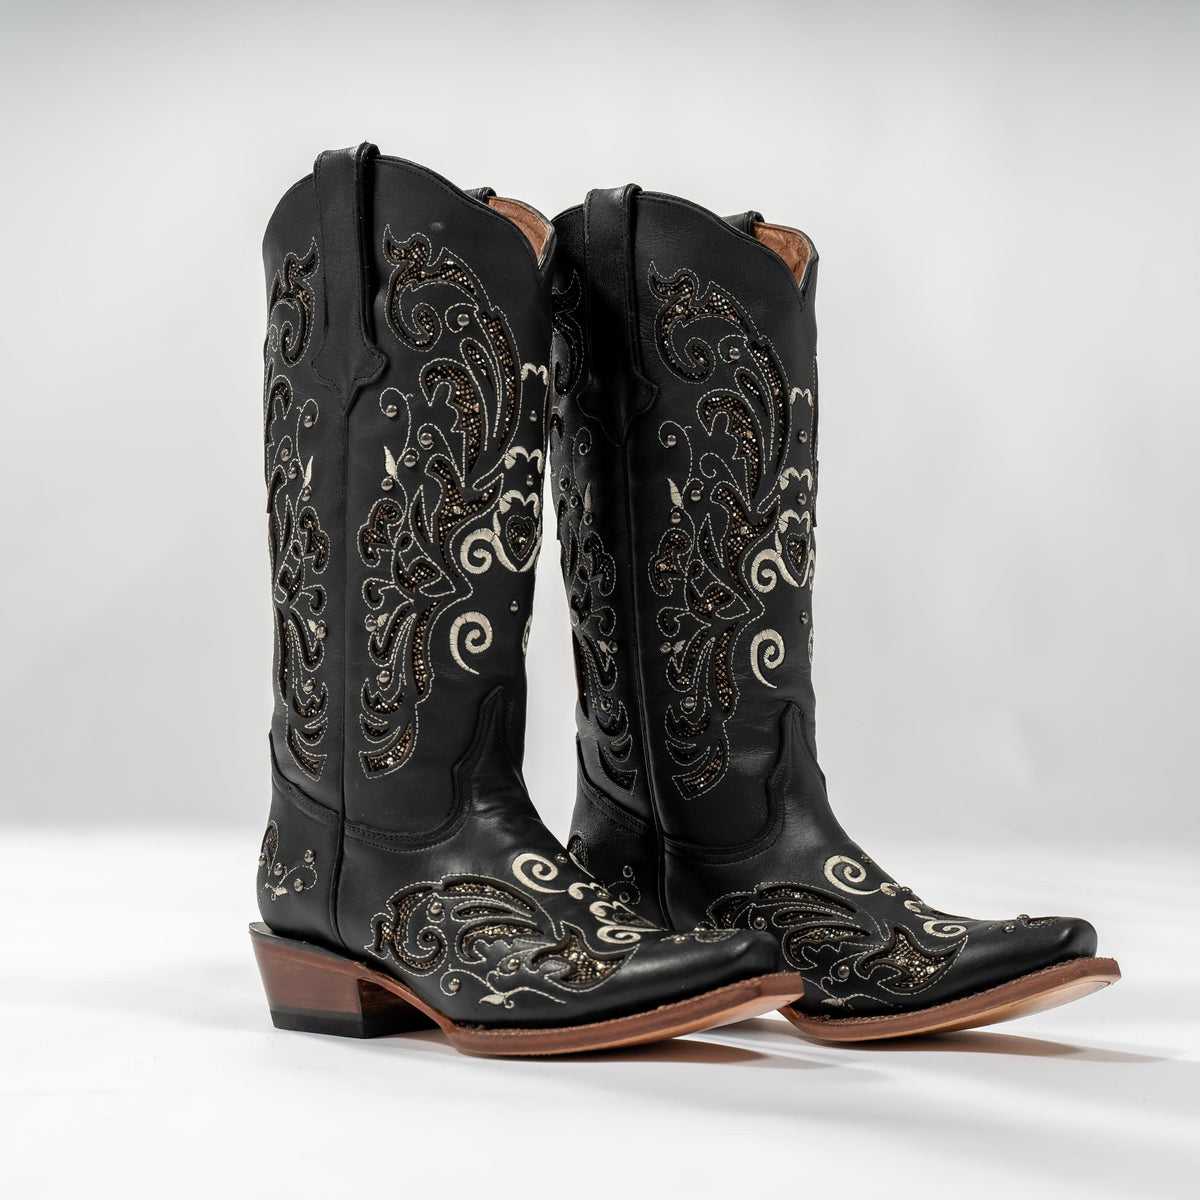 Tanner Mark Boot Venice Black - Midnight Black with Silver Shimmer Inlay